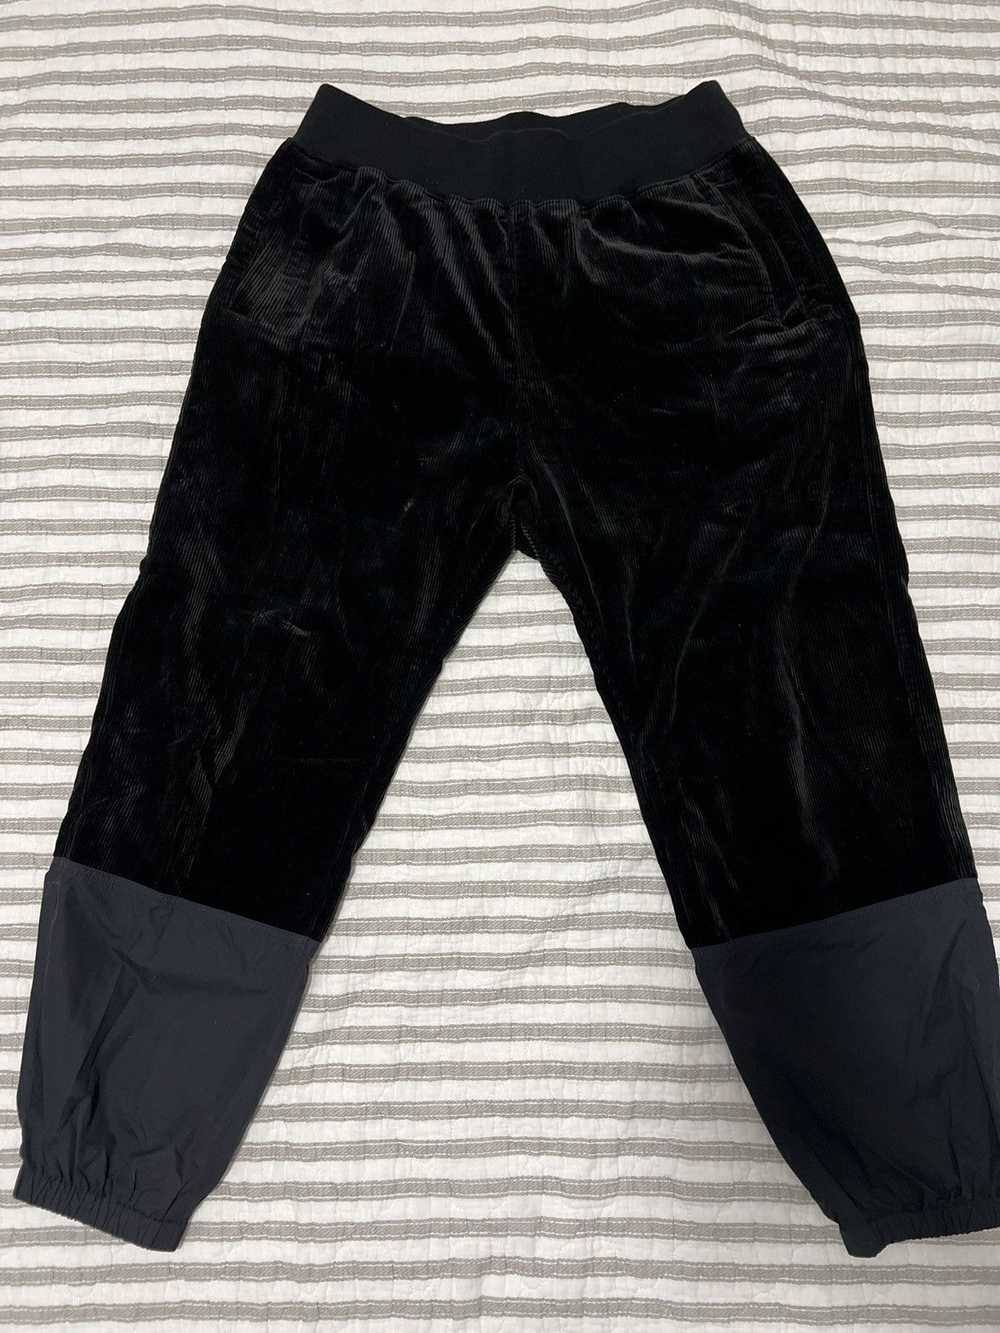 Undercover Undercover Corduroy Pants Sample - image 1